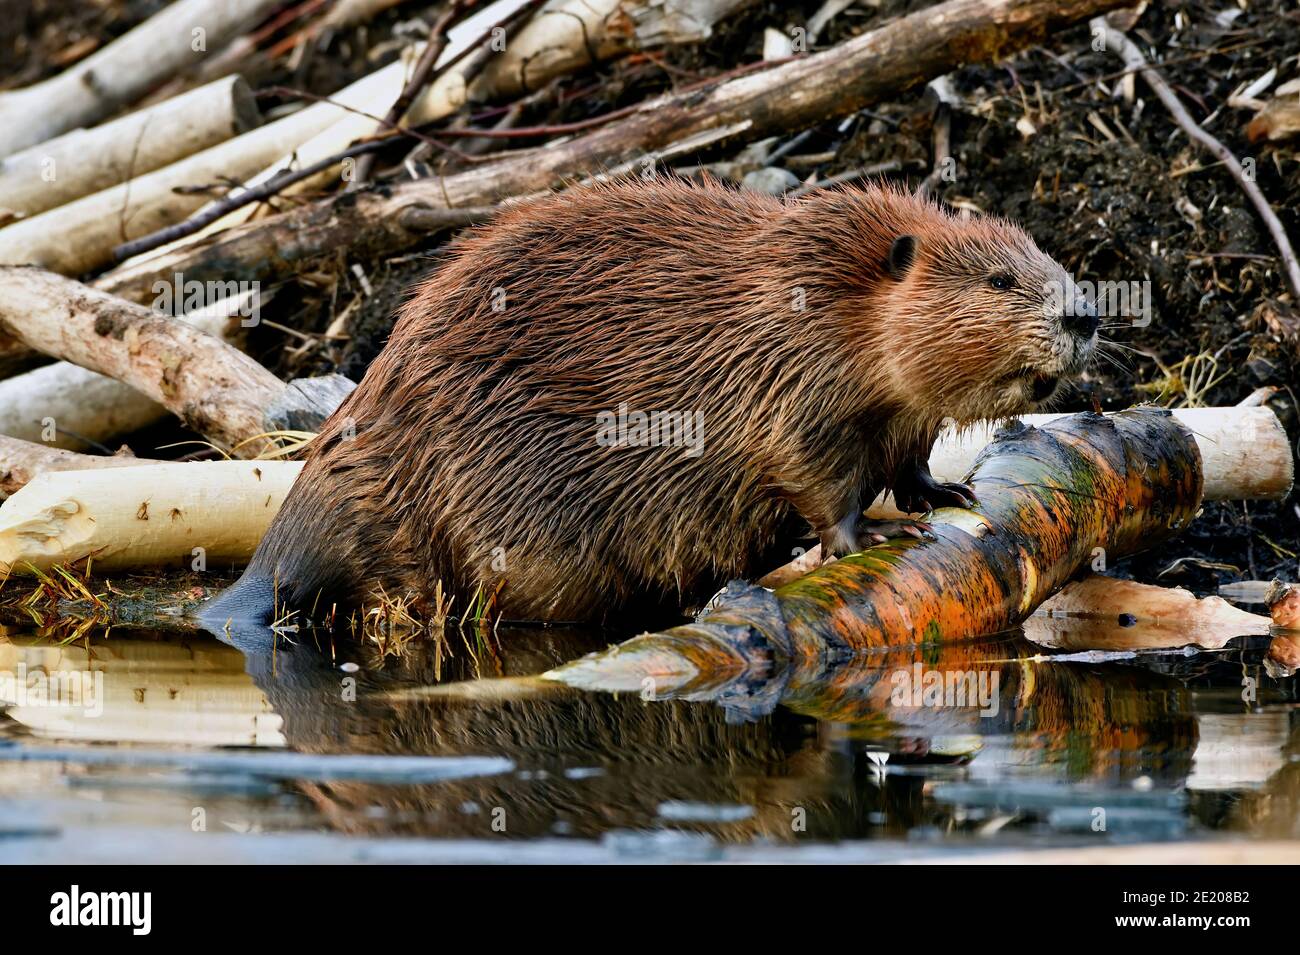 A wild beaver  'Castor canadensis', climbing out of the water and onto the side of his beaver lodge in rural Alberta Canada. Stock Photo